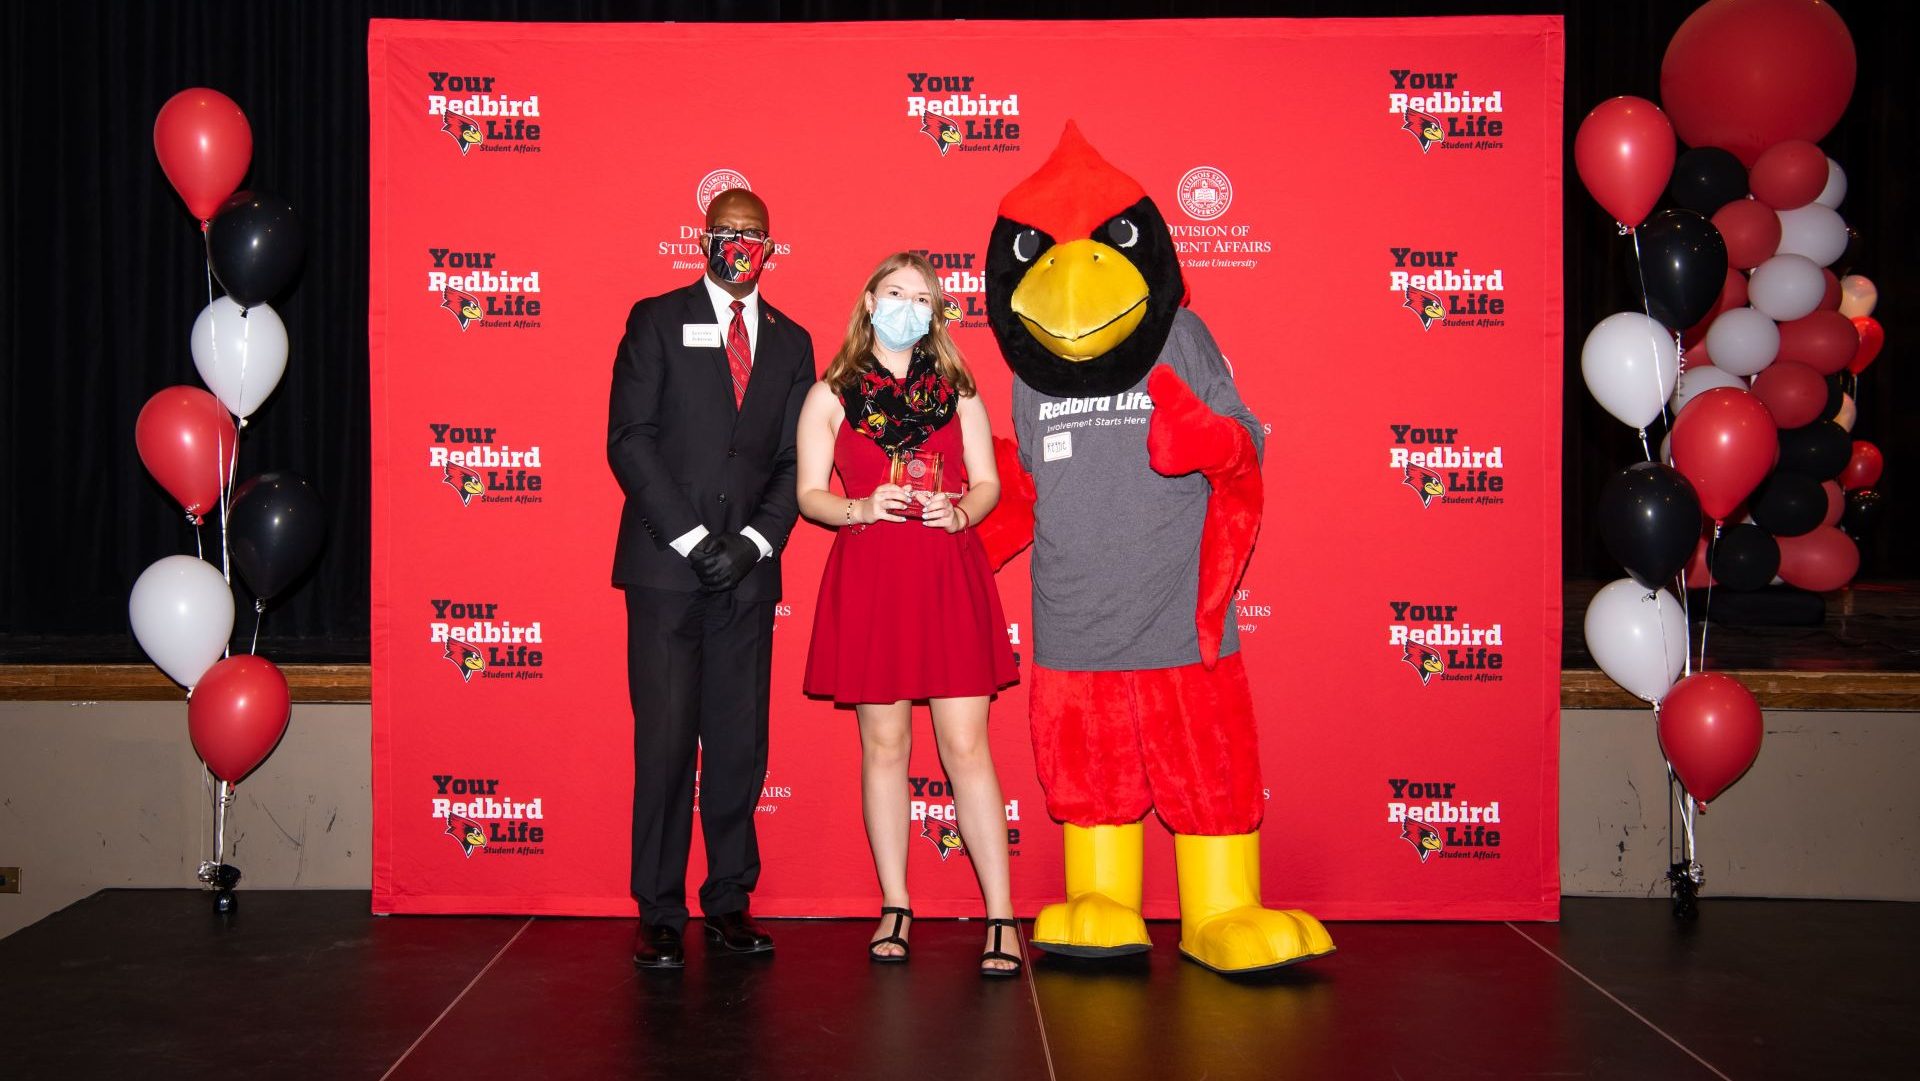 Jennifer Miller with Levester Johnson and Reggie Redbird at the Student Involvement Awards